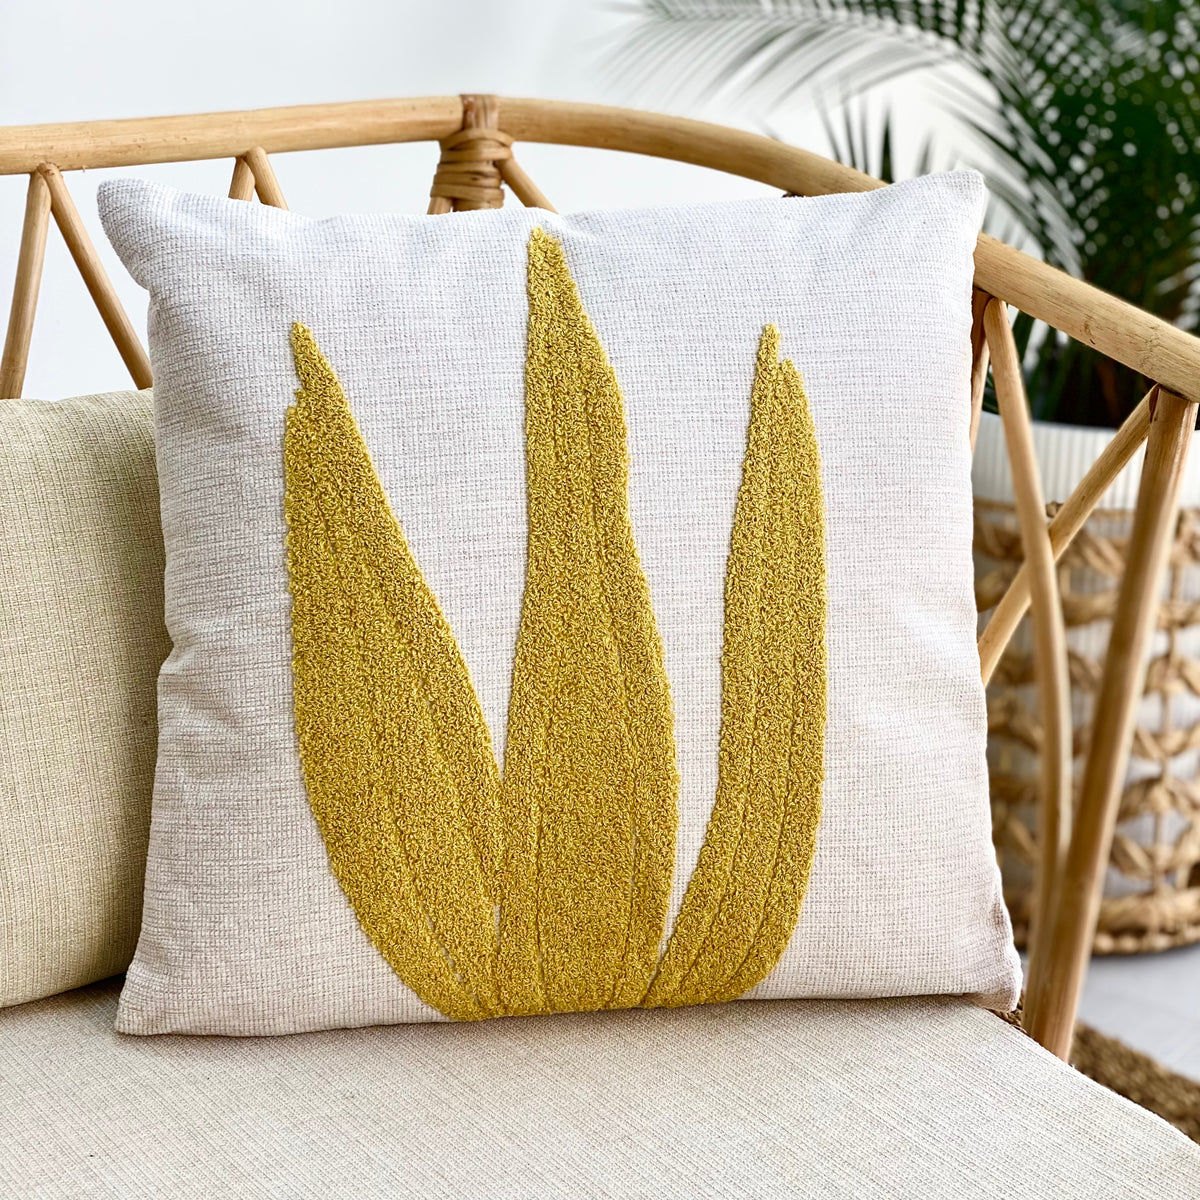 Embroidered Mustard Leaves Pillow